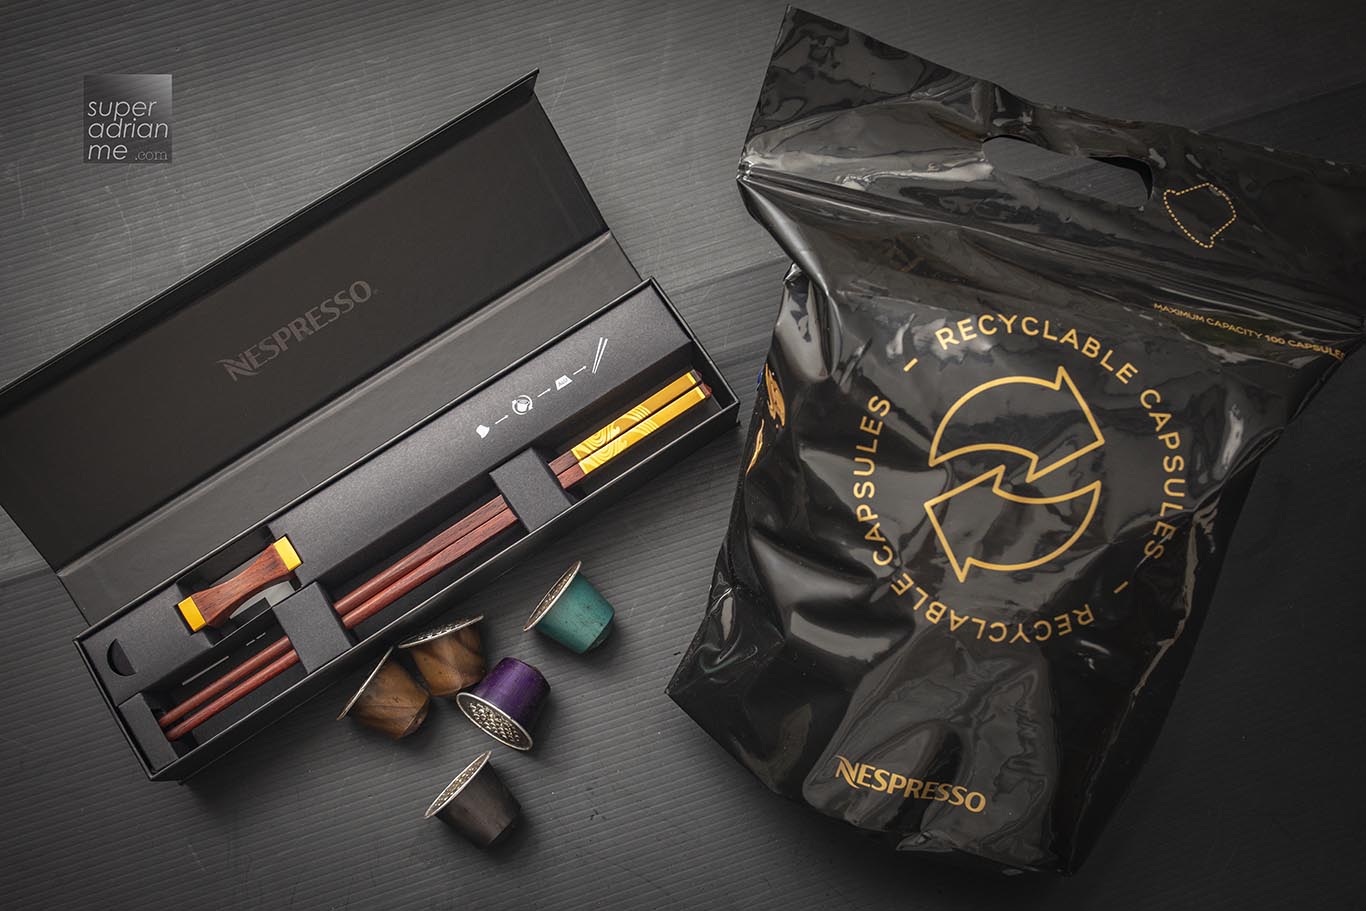 Nespresso Recycle To Win Limited Edition Chopsticks